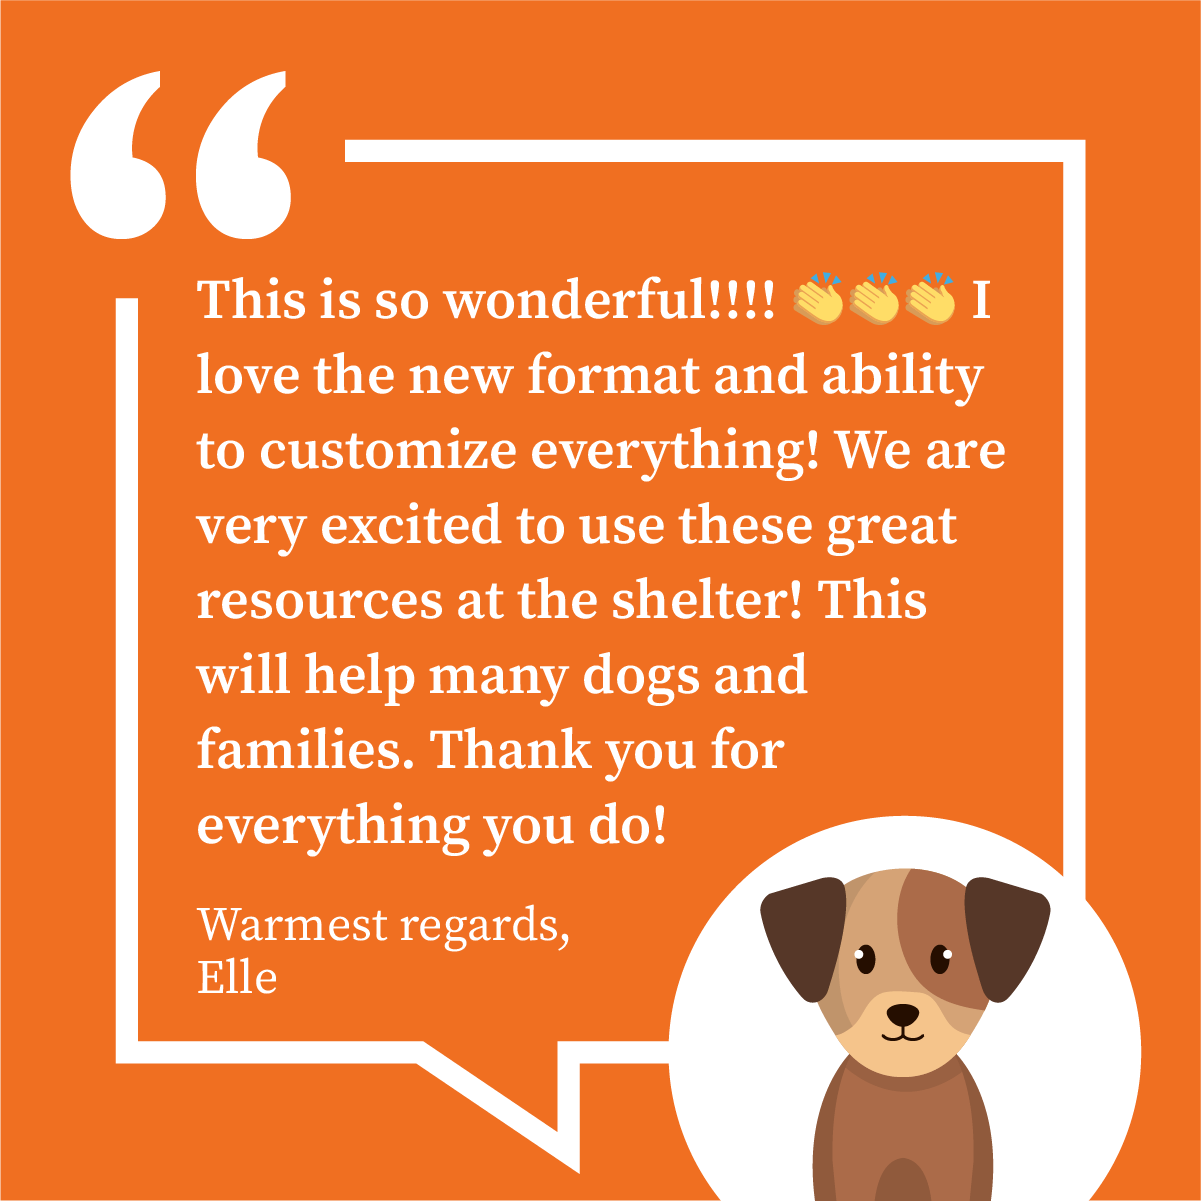 This is so wonderful!!!! 👏👏👏 I love the new format and ability to customize everything! We are very excited to use these great resources at the shelter! This will help many dogs and families. Thank you for everything you do!  Warmest regards,   Elle 